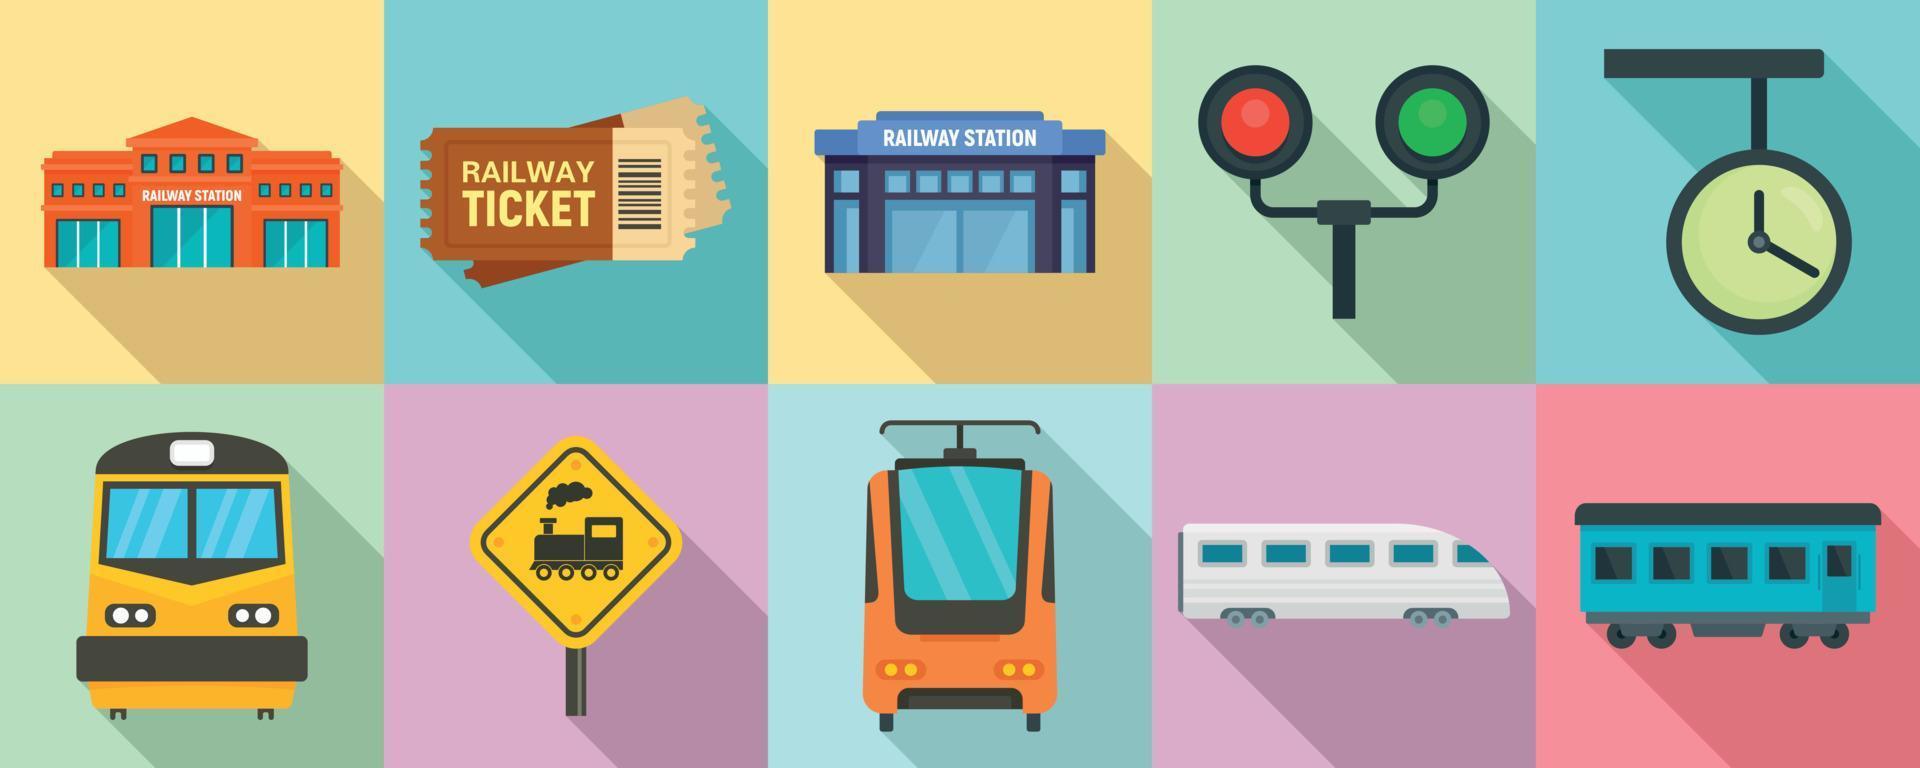 Railway station icons set, flat style vector